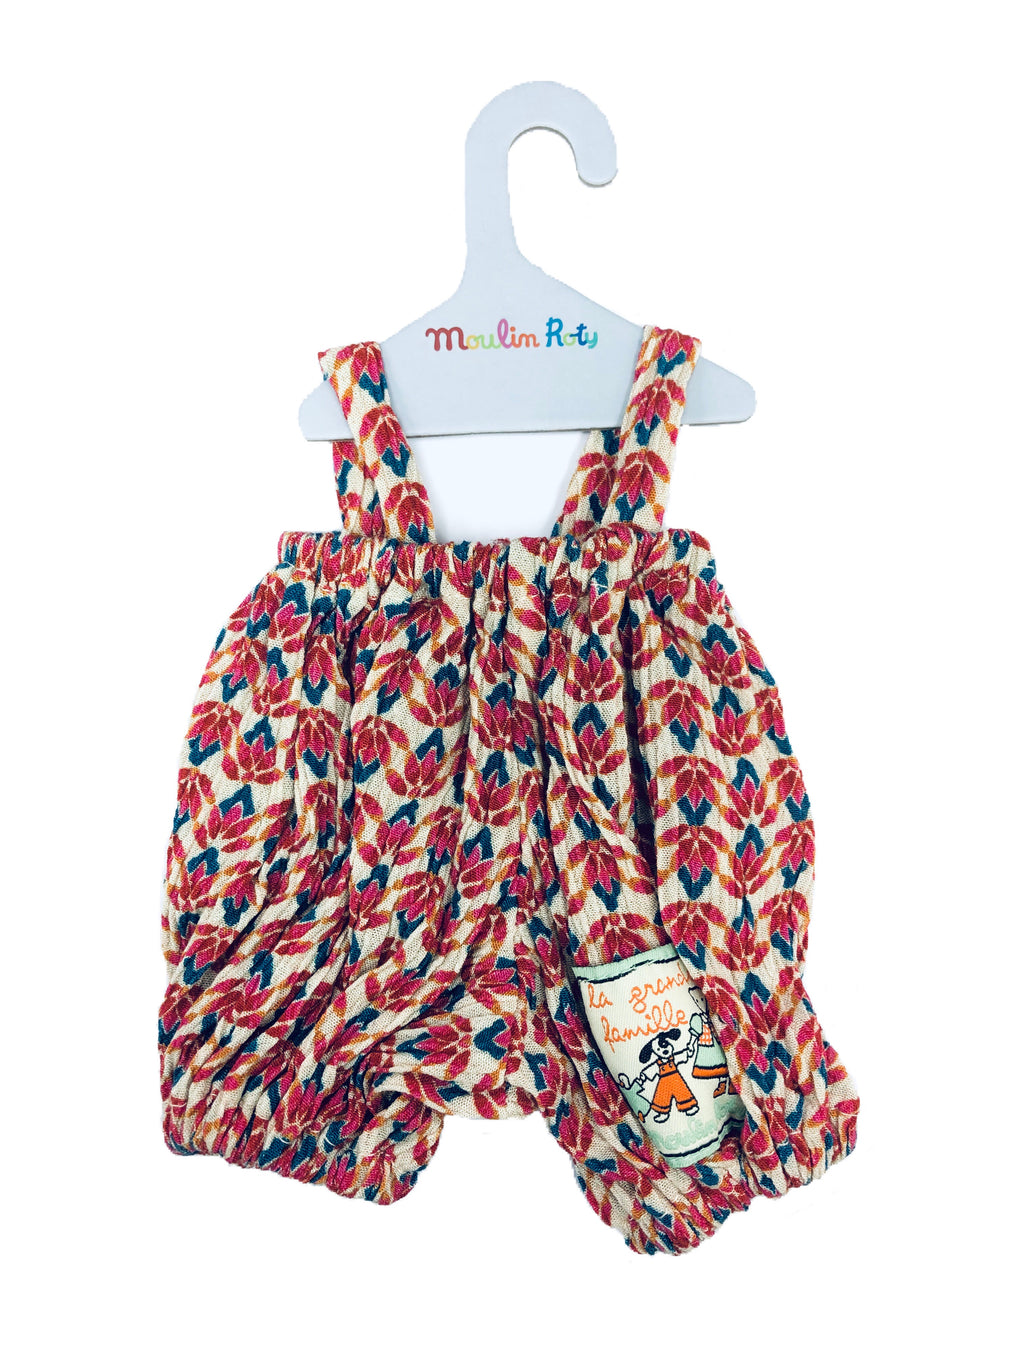 Moulin Roty | Cotton Doll Clothes | Red Printed Dungarees | Size: for 30cm tall plush animals and dolls | Age: 0+